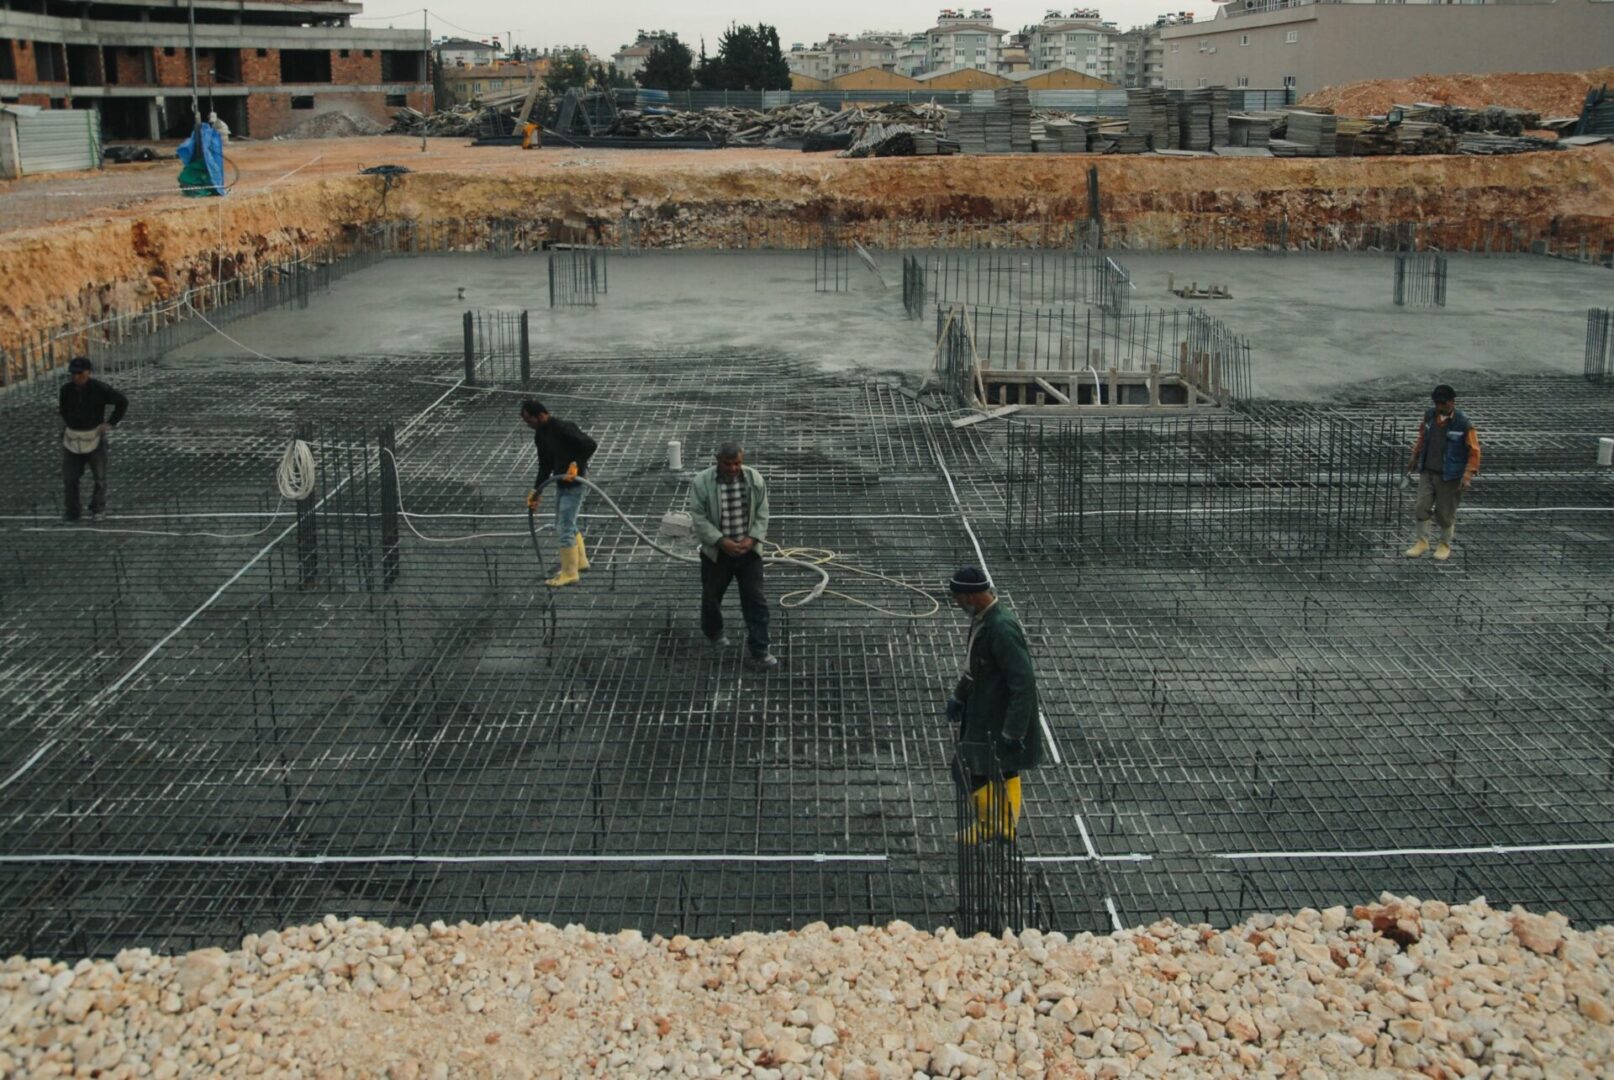 A group of men working on concrete in the middle of construction.